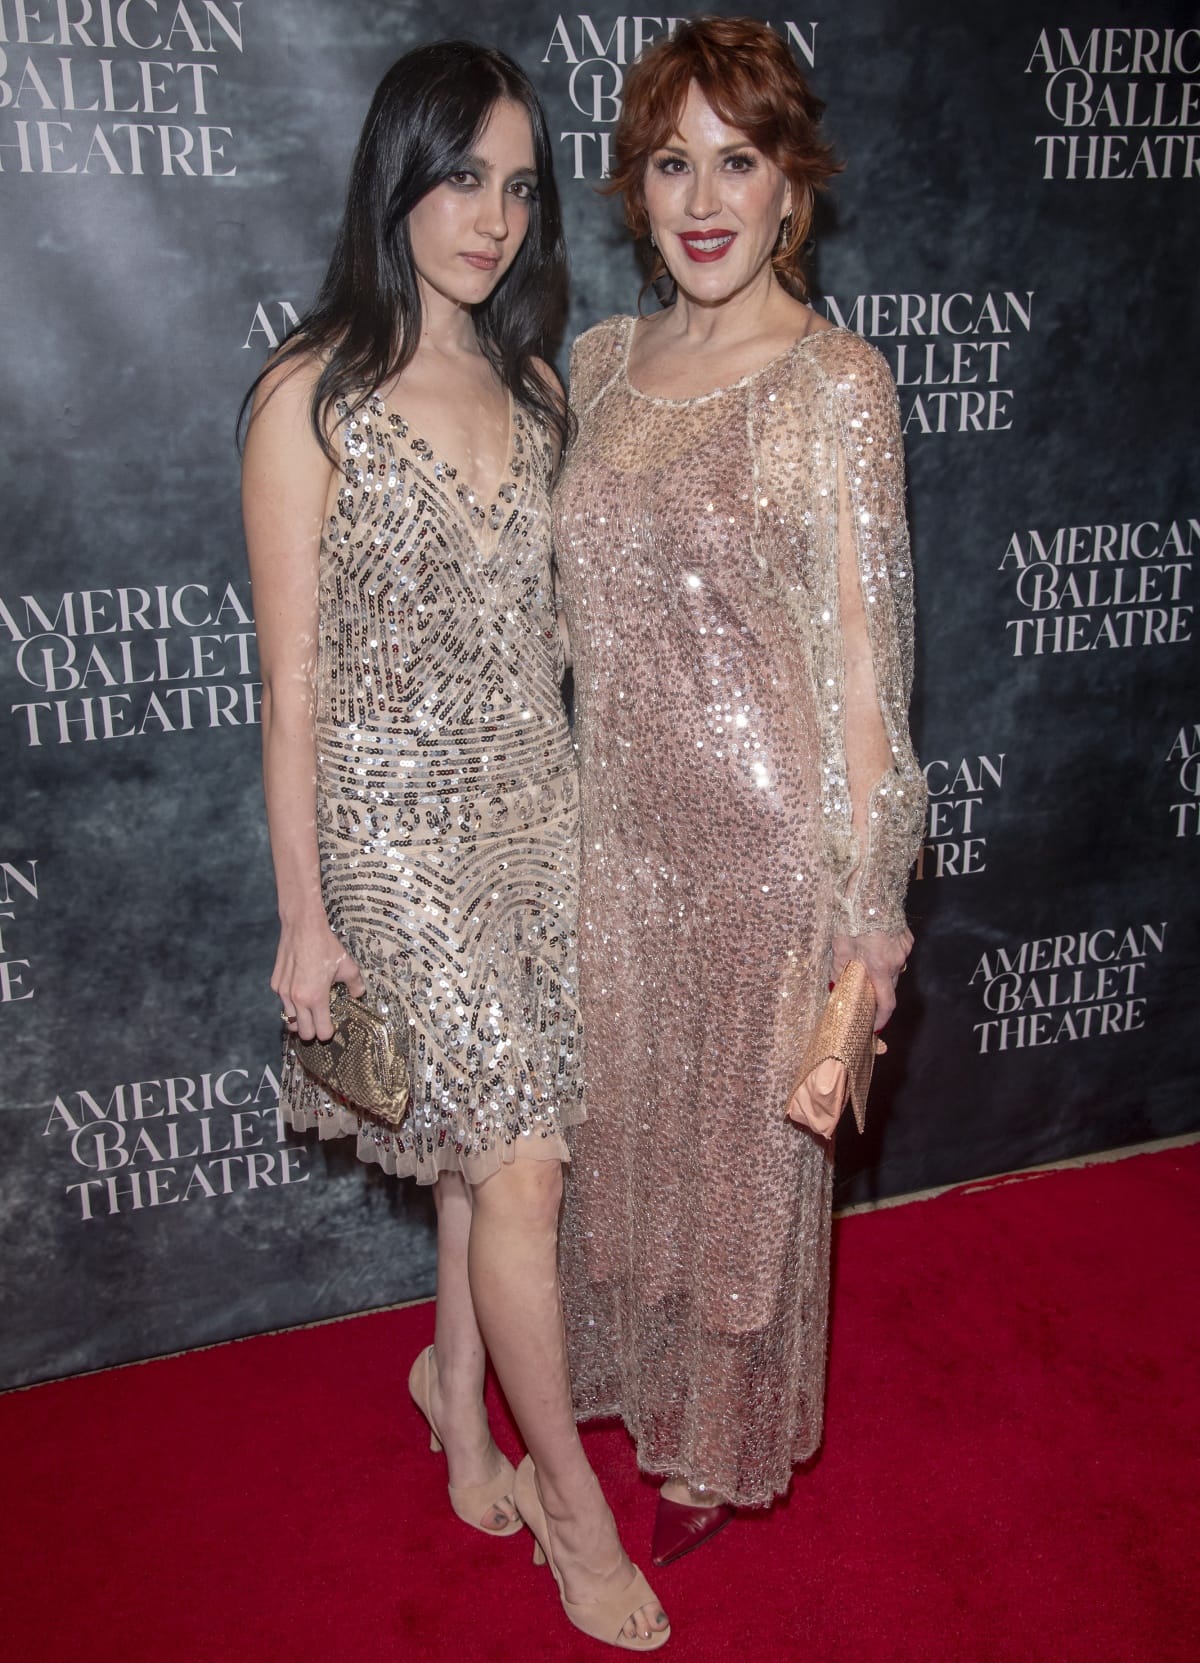 Mathilda Gianopoulos and Molly Ringwald making a glittering entrance at the American Ballet Theater Fall Gala